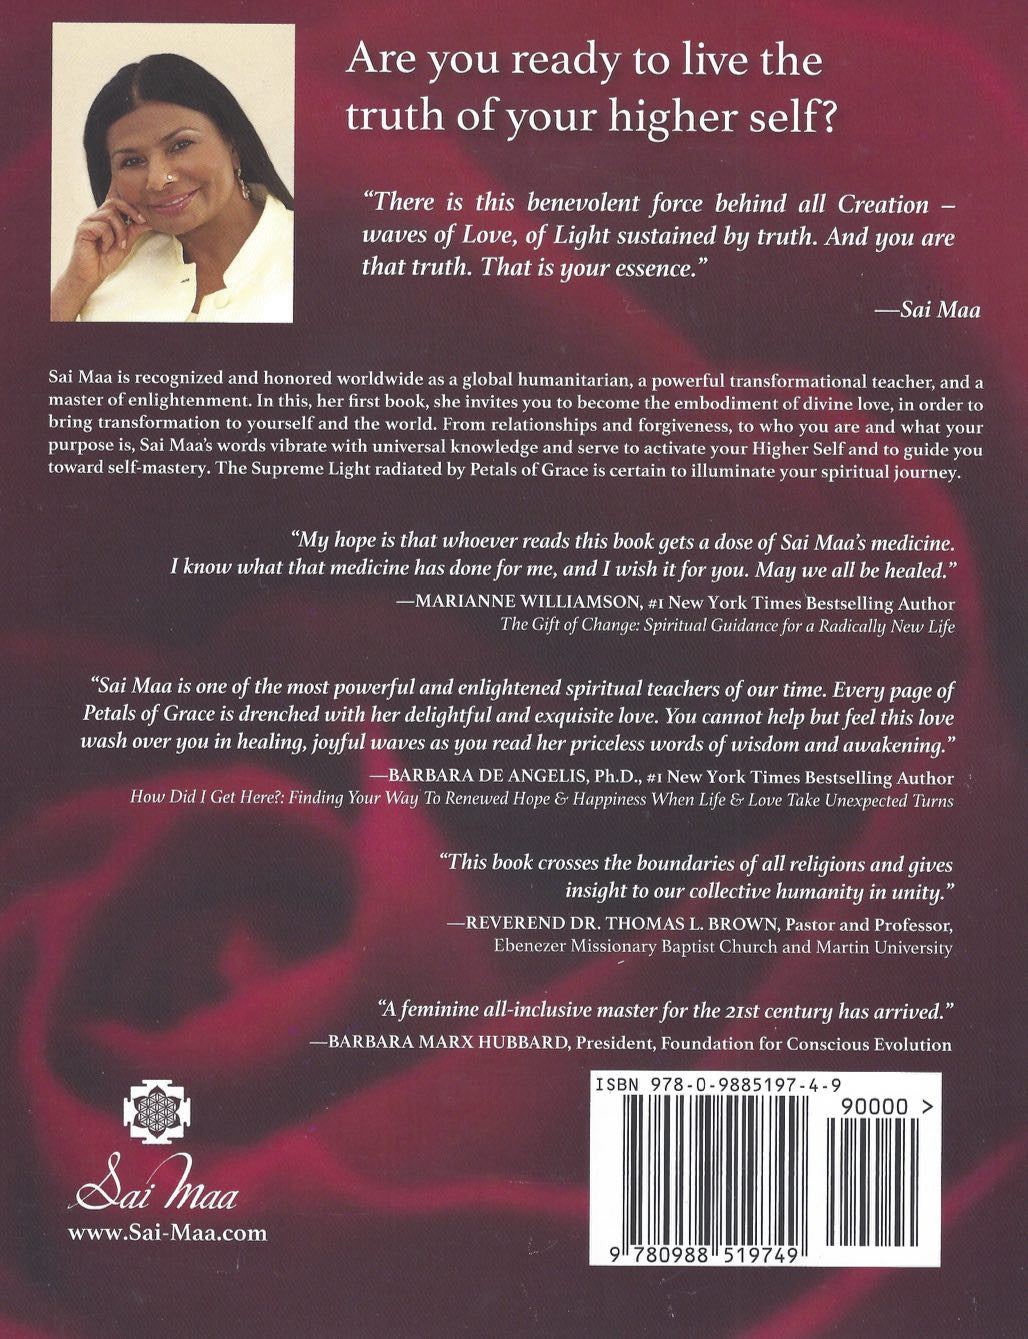 Petals of Grace: Essential Teachings for Self-Mastery